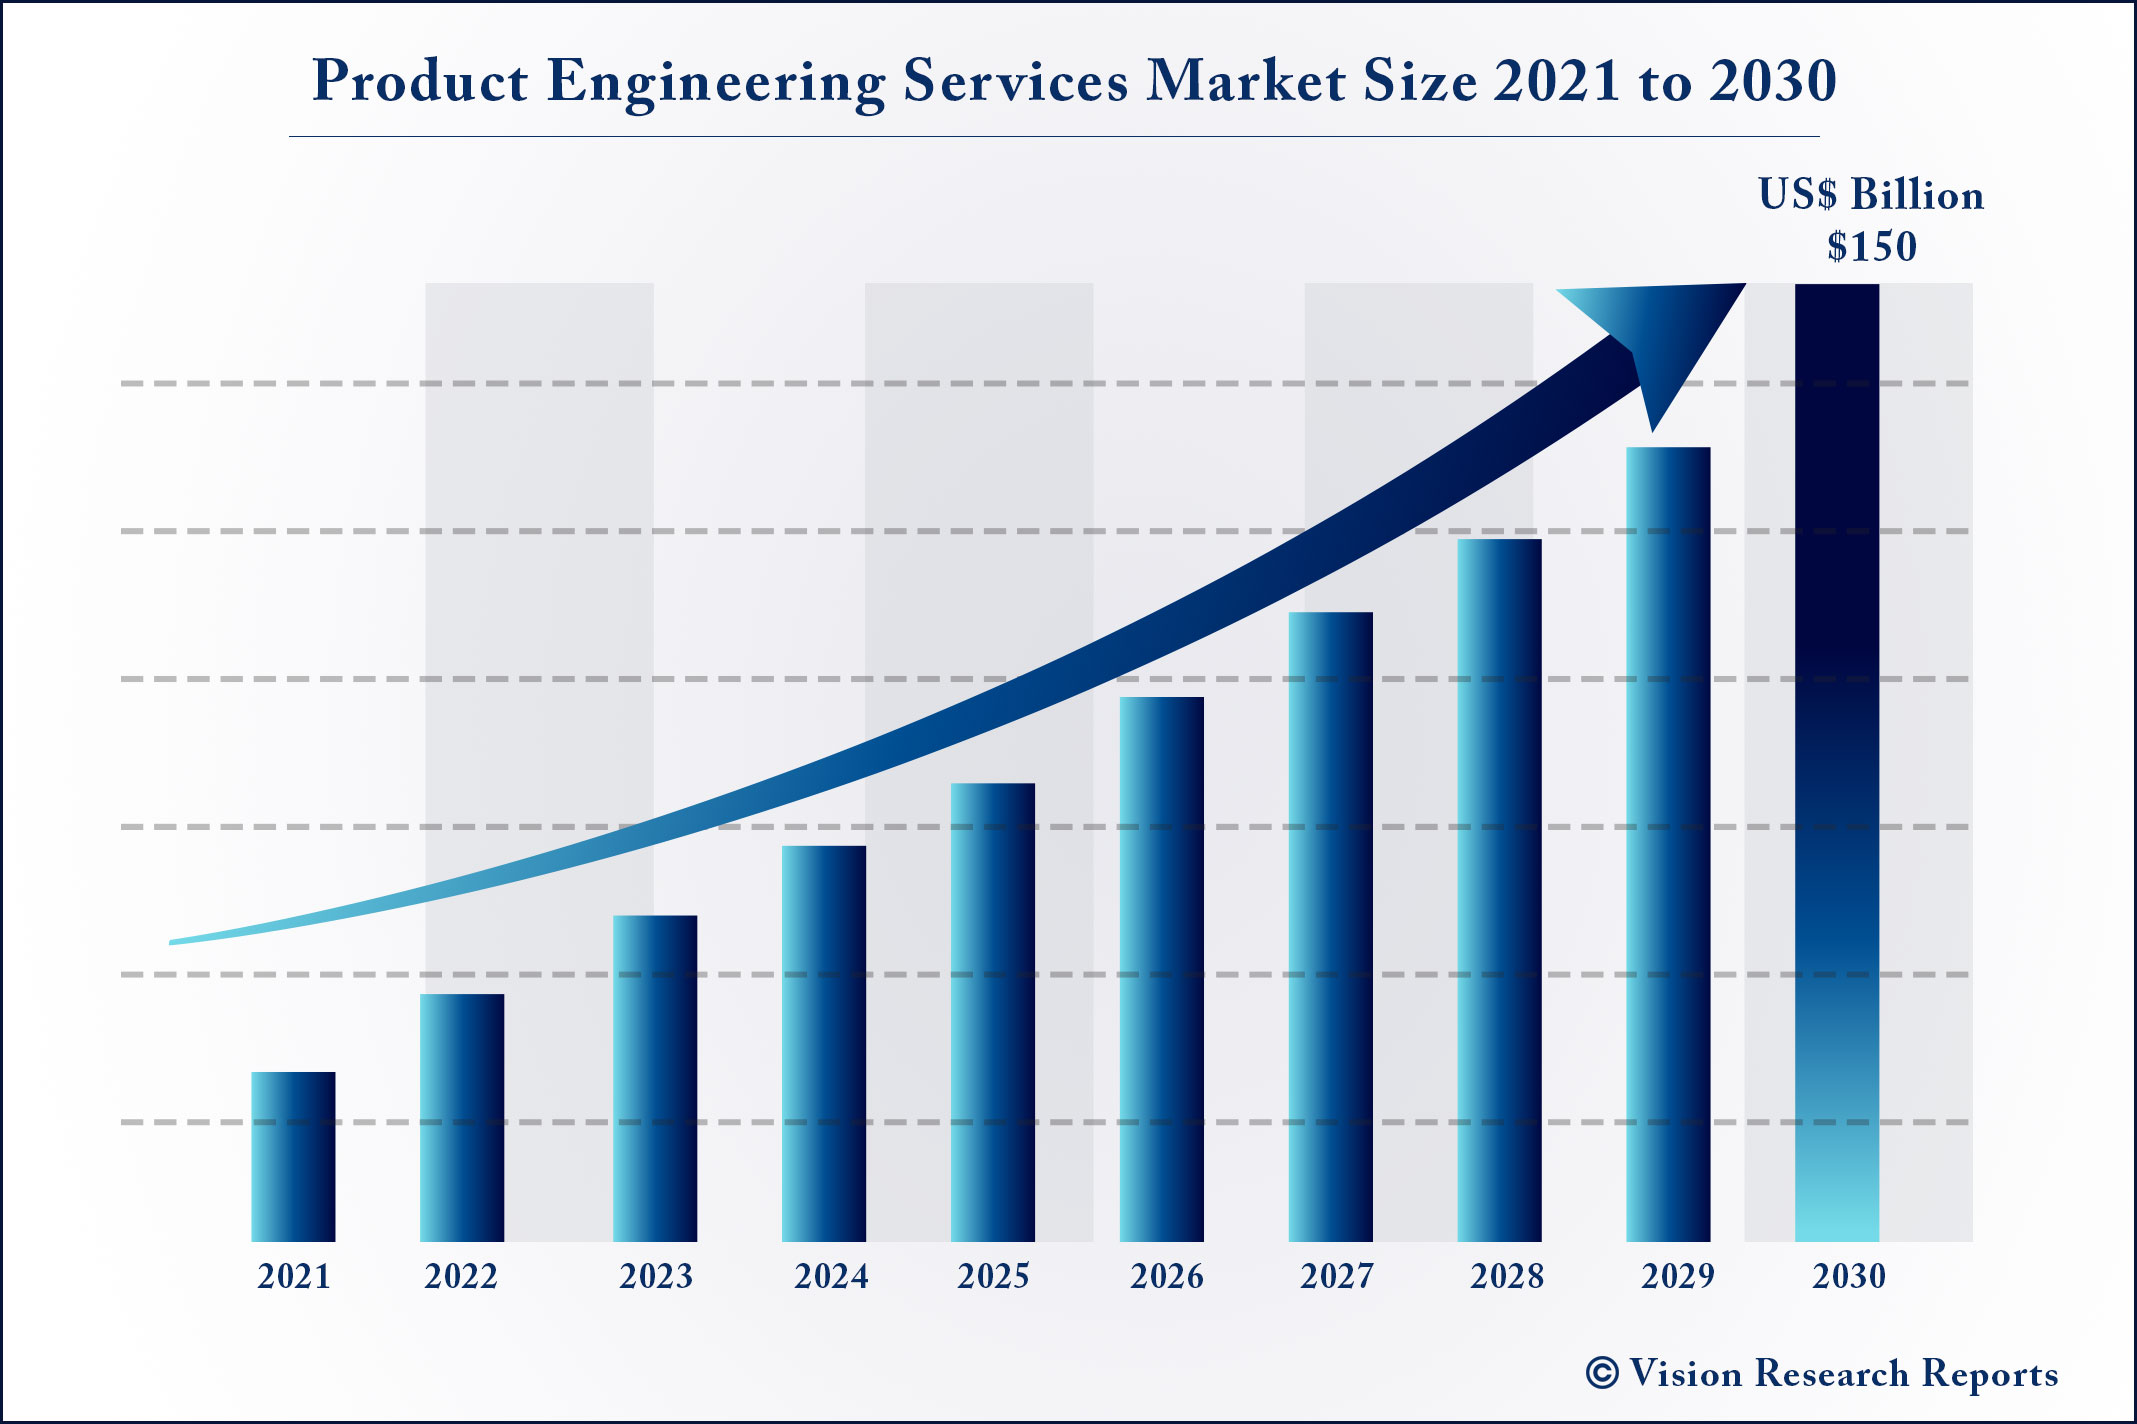 Product Engineering Services Market Size 2021 to 2030